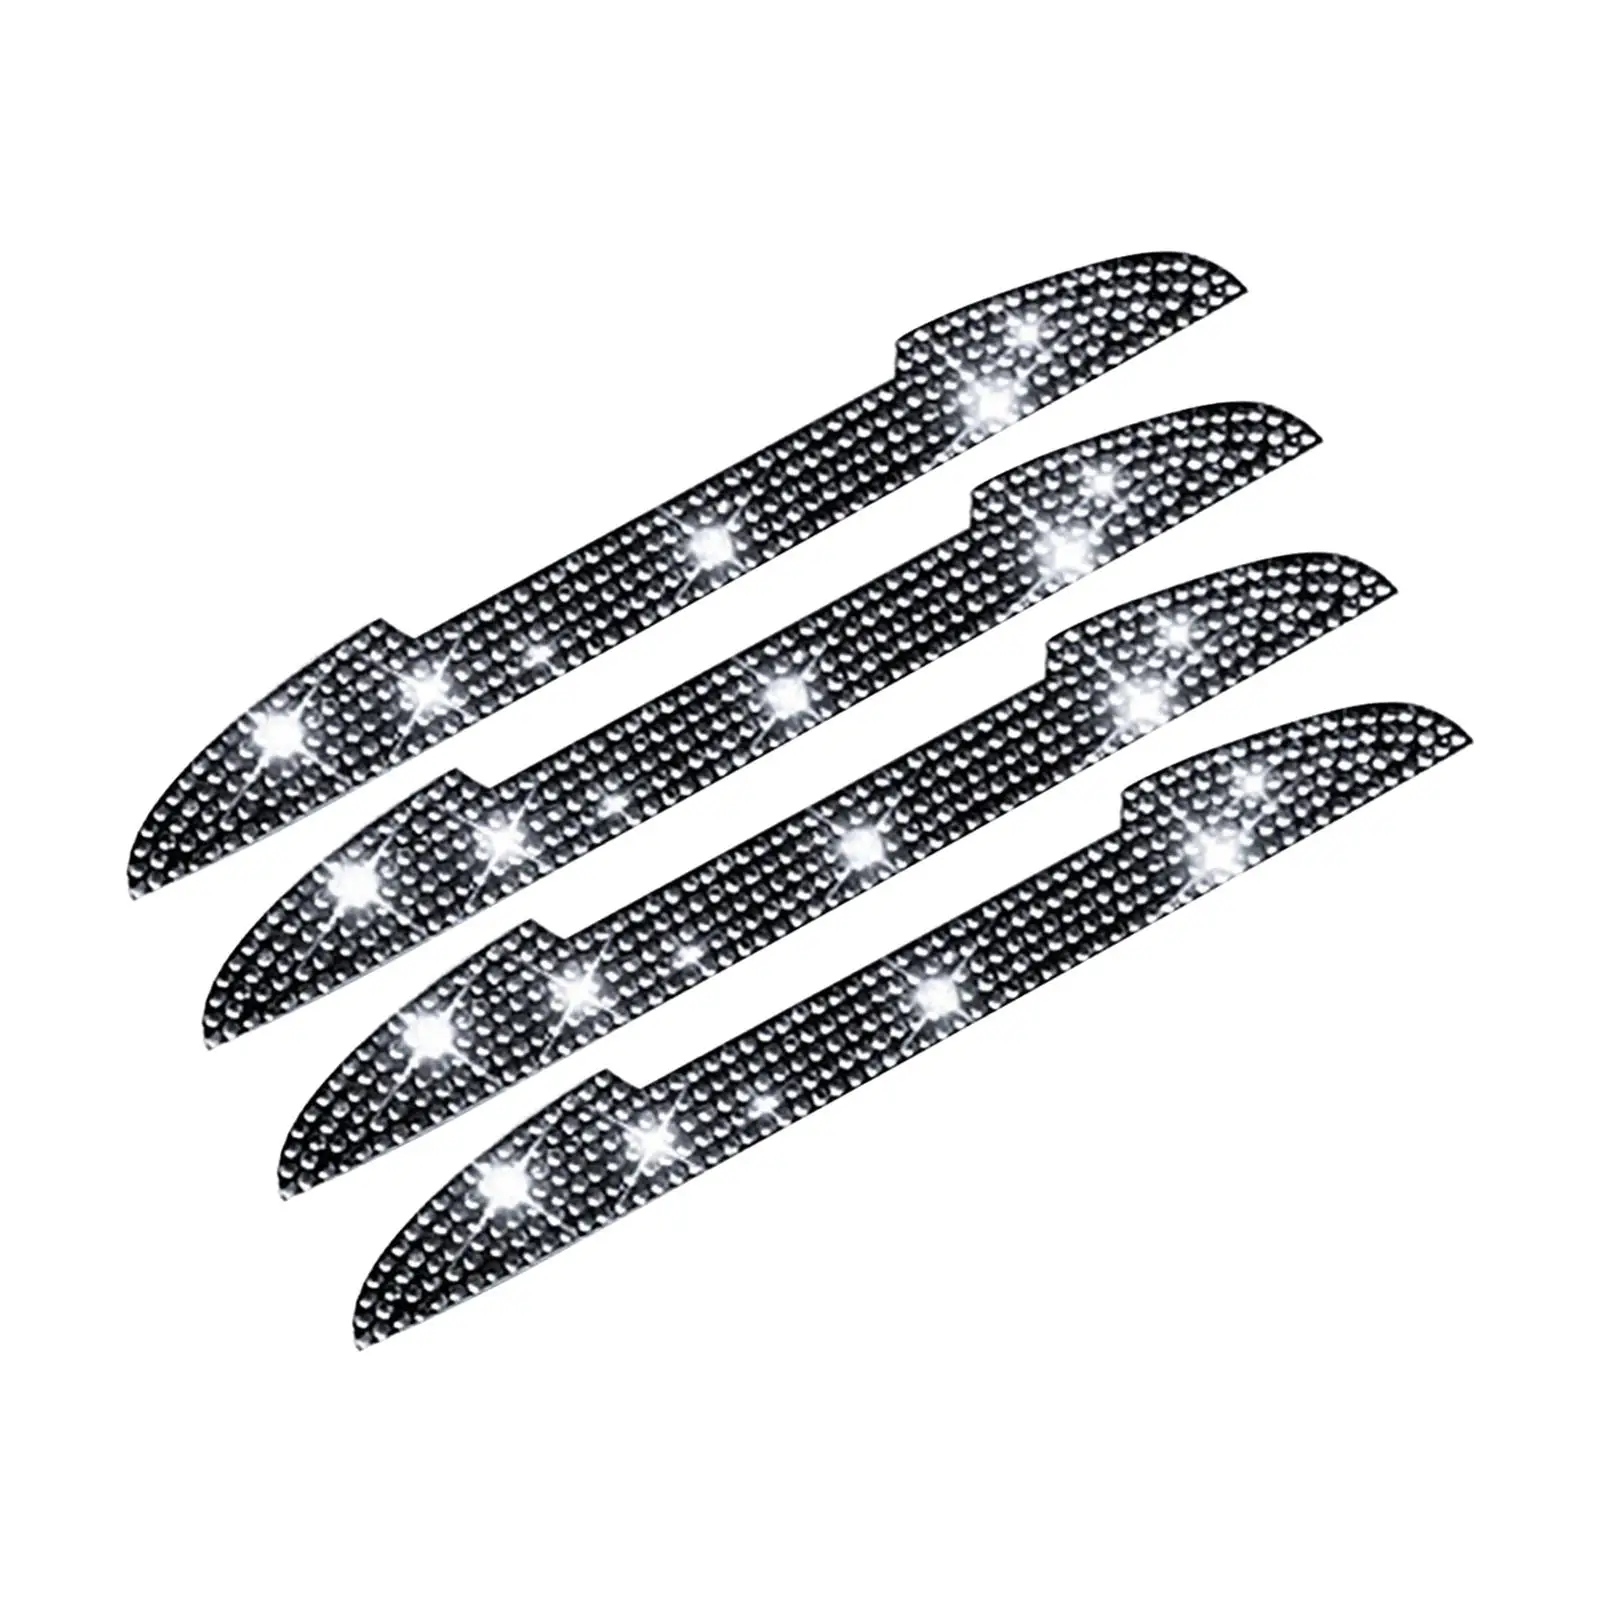 4x Car Door Side Edge Protection Guards Anti Scratch Trim Stickers for